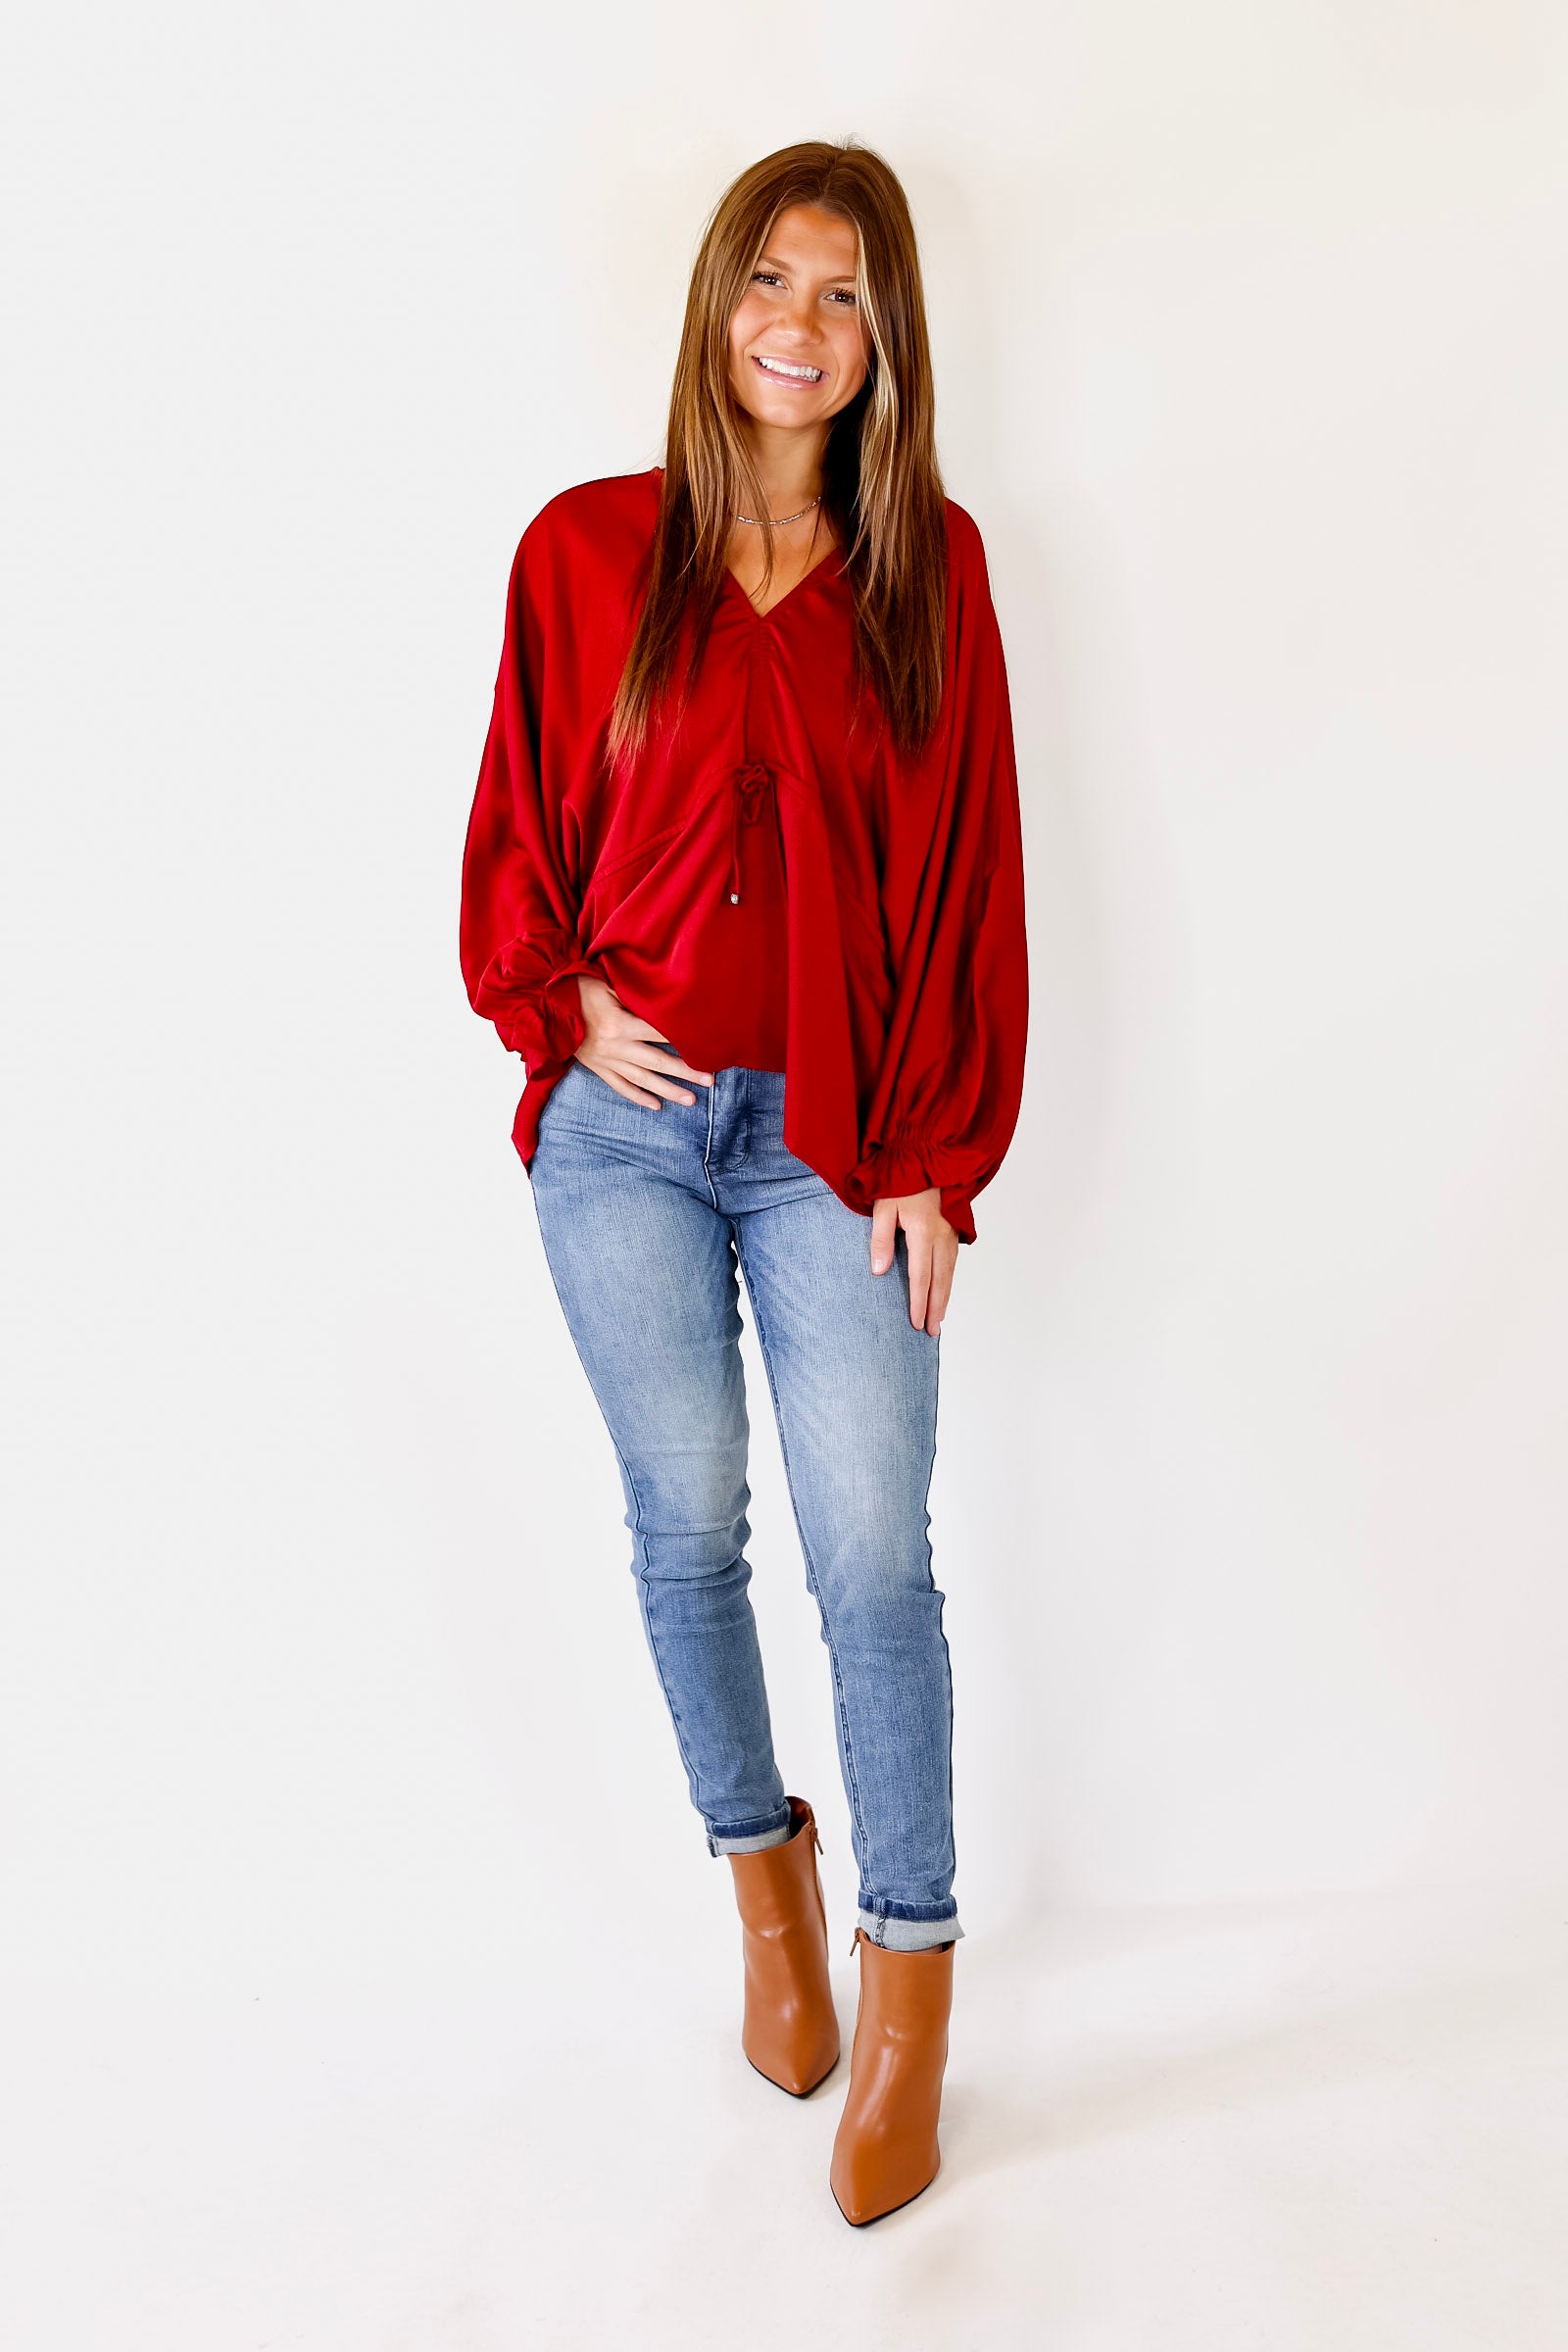 Stating Facts Satin Top with Drawstring Waist in Dark Red - Giddy Up Glamour Boutique